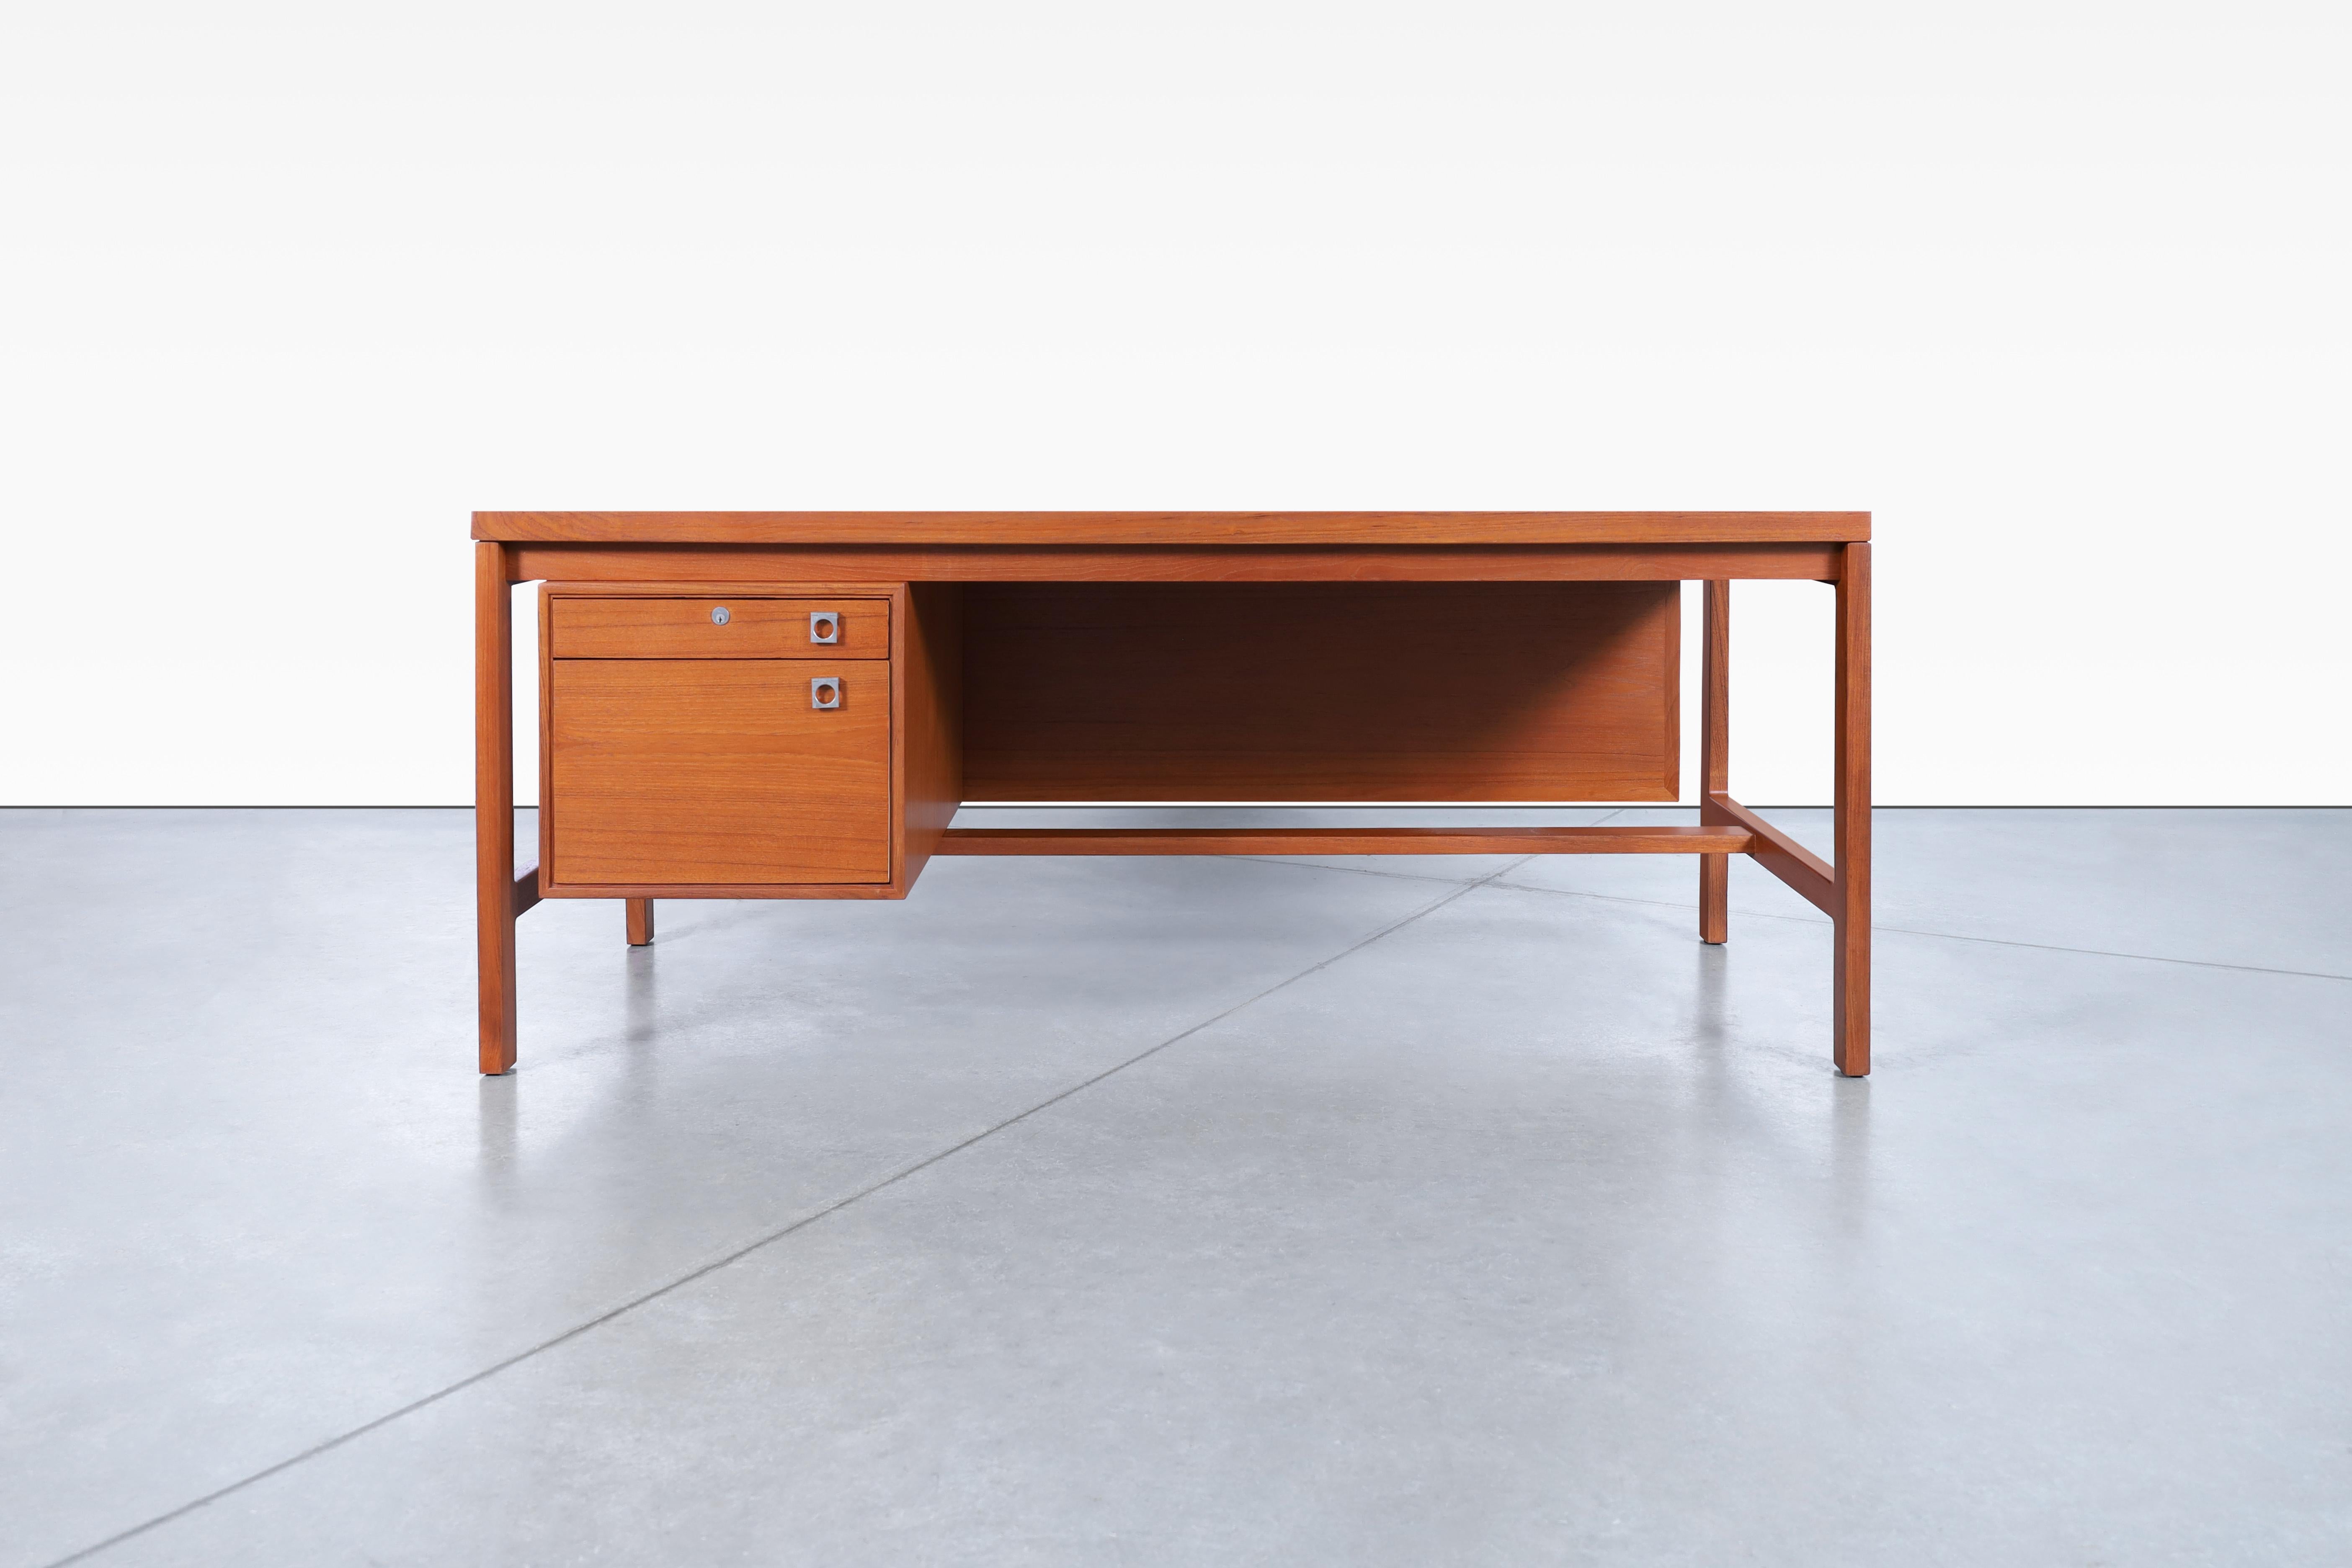 Stunning Danish modern executive teak desk designed by Arne Vodder for H.P Hansen in Denmark, circa 1960’s. This rectangular desk shows wonderful details that are very well executed. Features a pull-out dovetailed drawer and a file drawer, all